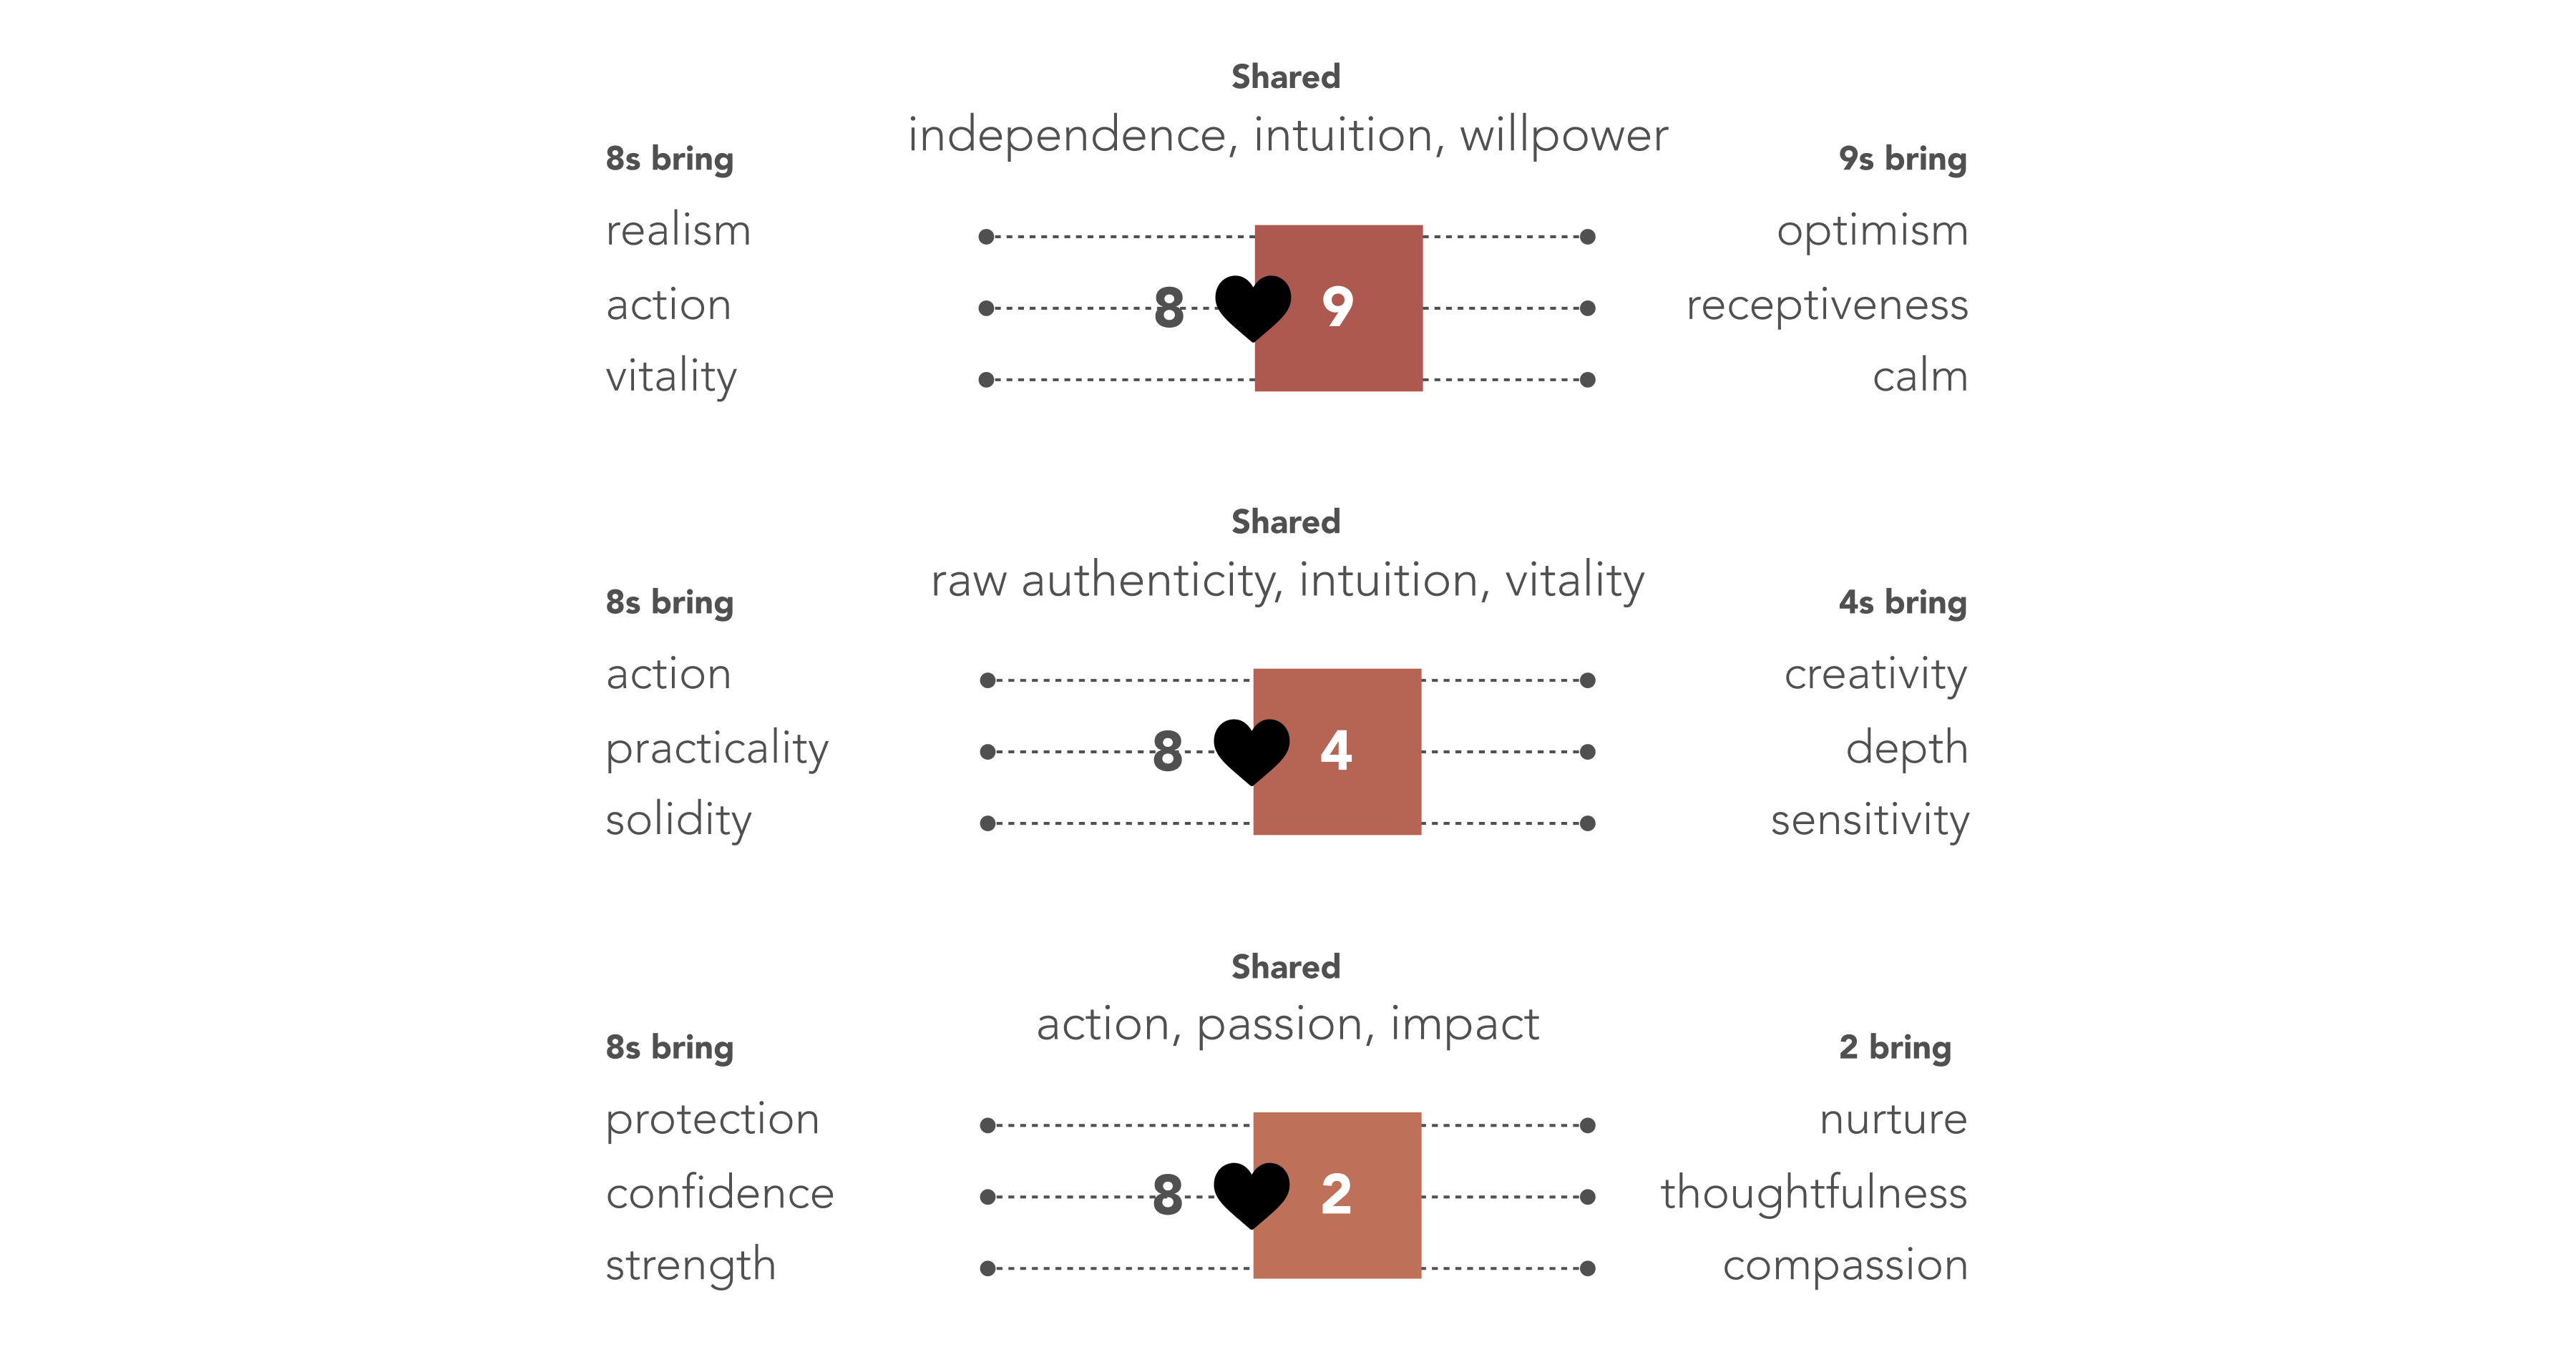 8s and 9s share independence, intuition, willpower. 8s bring realism, action, vitality, while 9s bring optimism, receptiveness, calm. 8s and 4s share raw authenticity, intuition, vitality. 8s bring action, practicality, solidity, while 4s bring creativity, depth, sensitivity. 8s and 2s share action, passion, impact. 8s bring protection, confidence, strength, while 2s bring nurture, thoughtfulness, compassion.